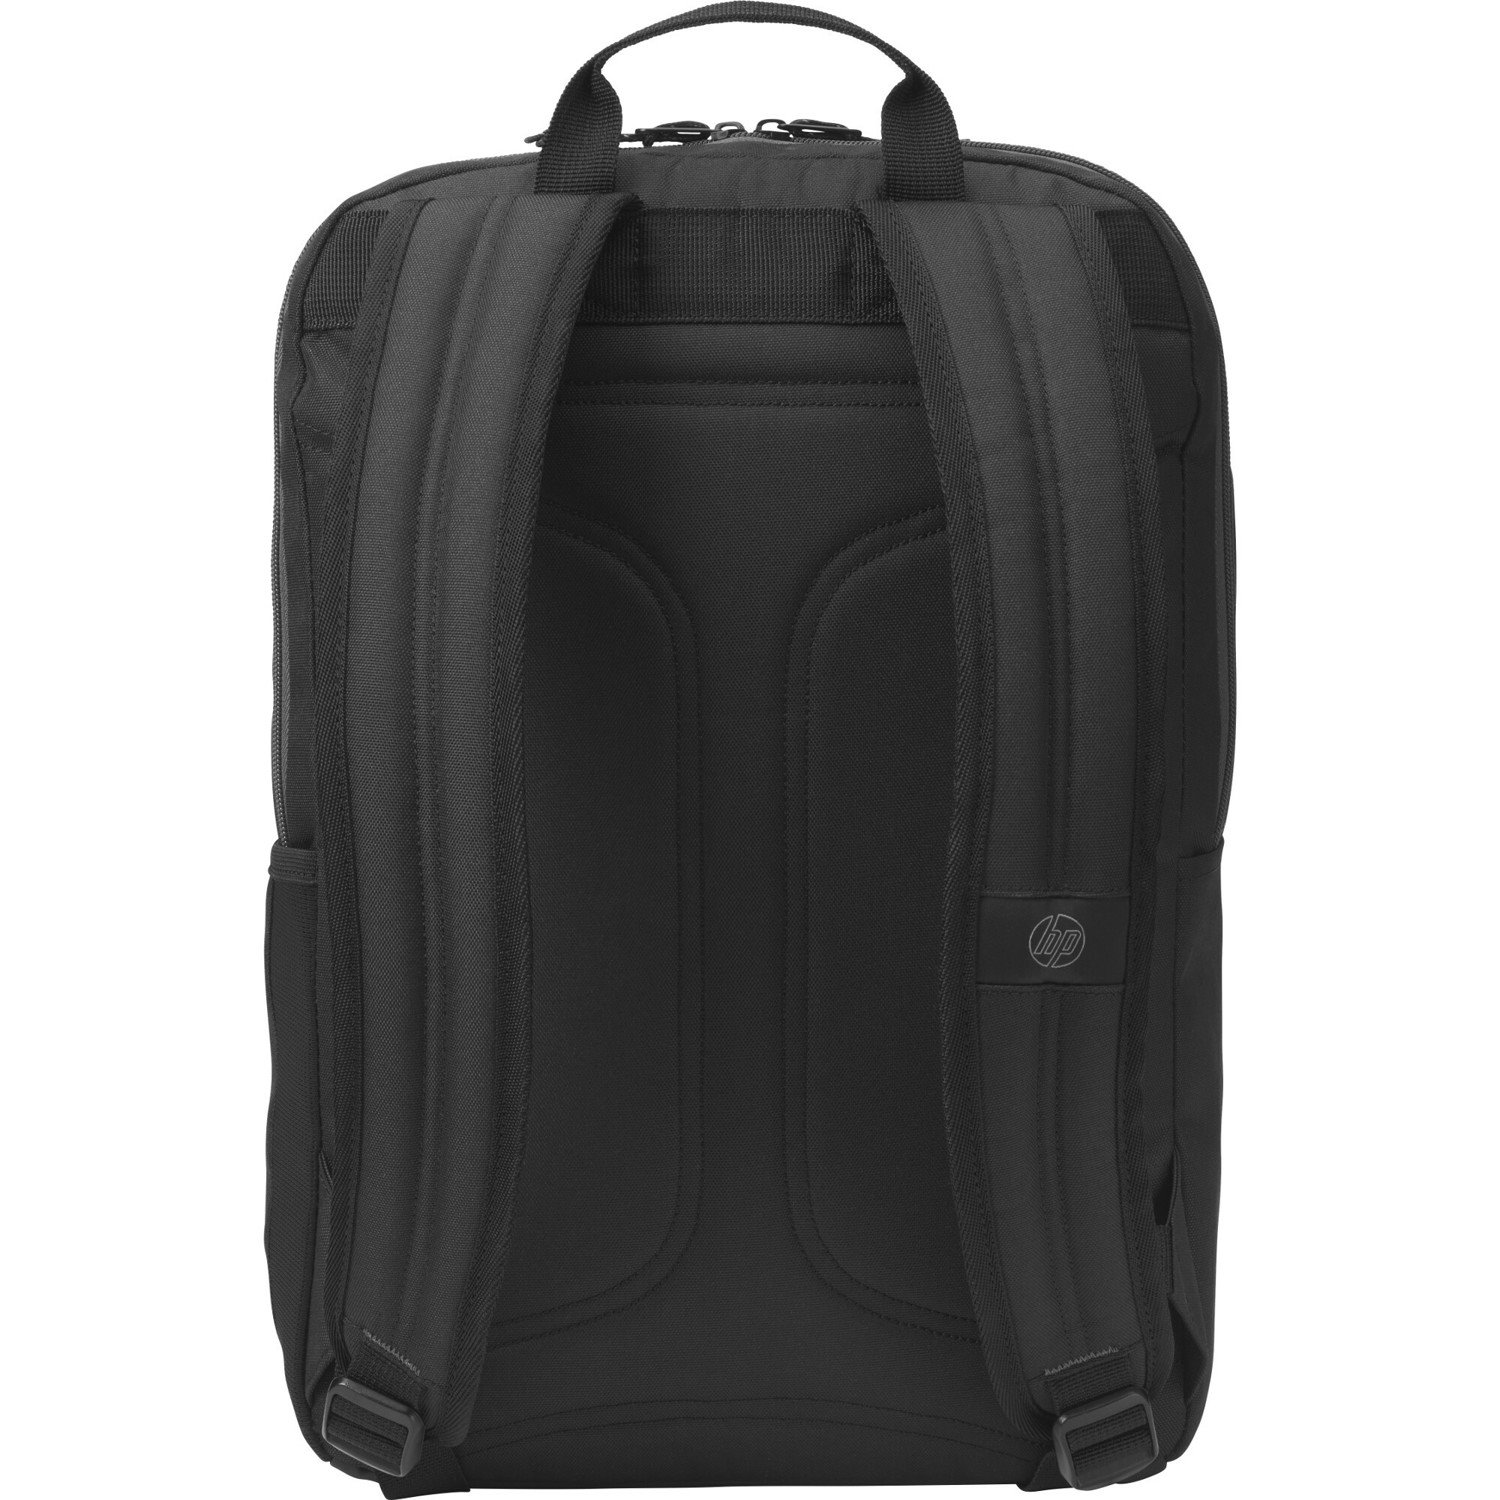 HP Commuter Carrying Case (Backpack) for 15.6" Notebook - Black